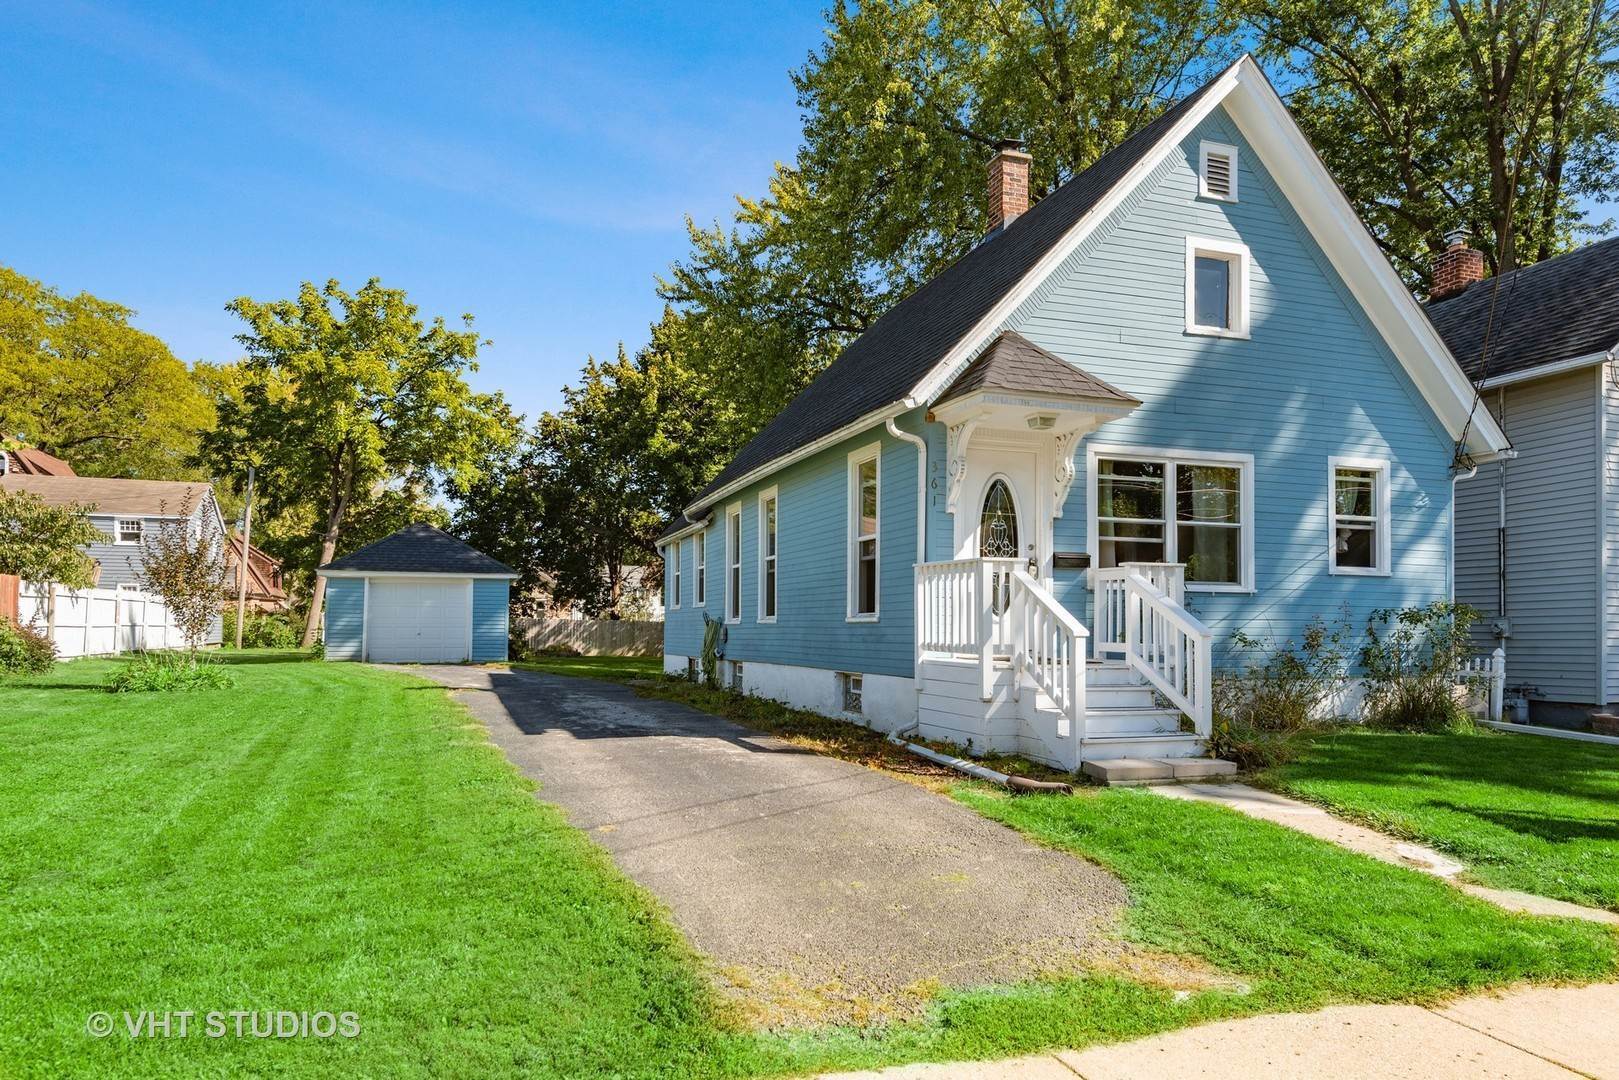 Single Family for Sale at Elgin, IL 60123